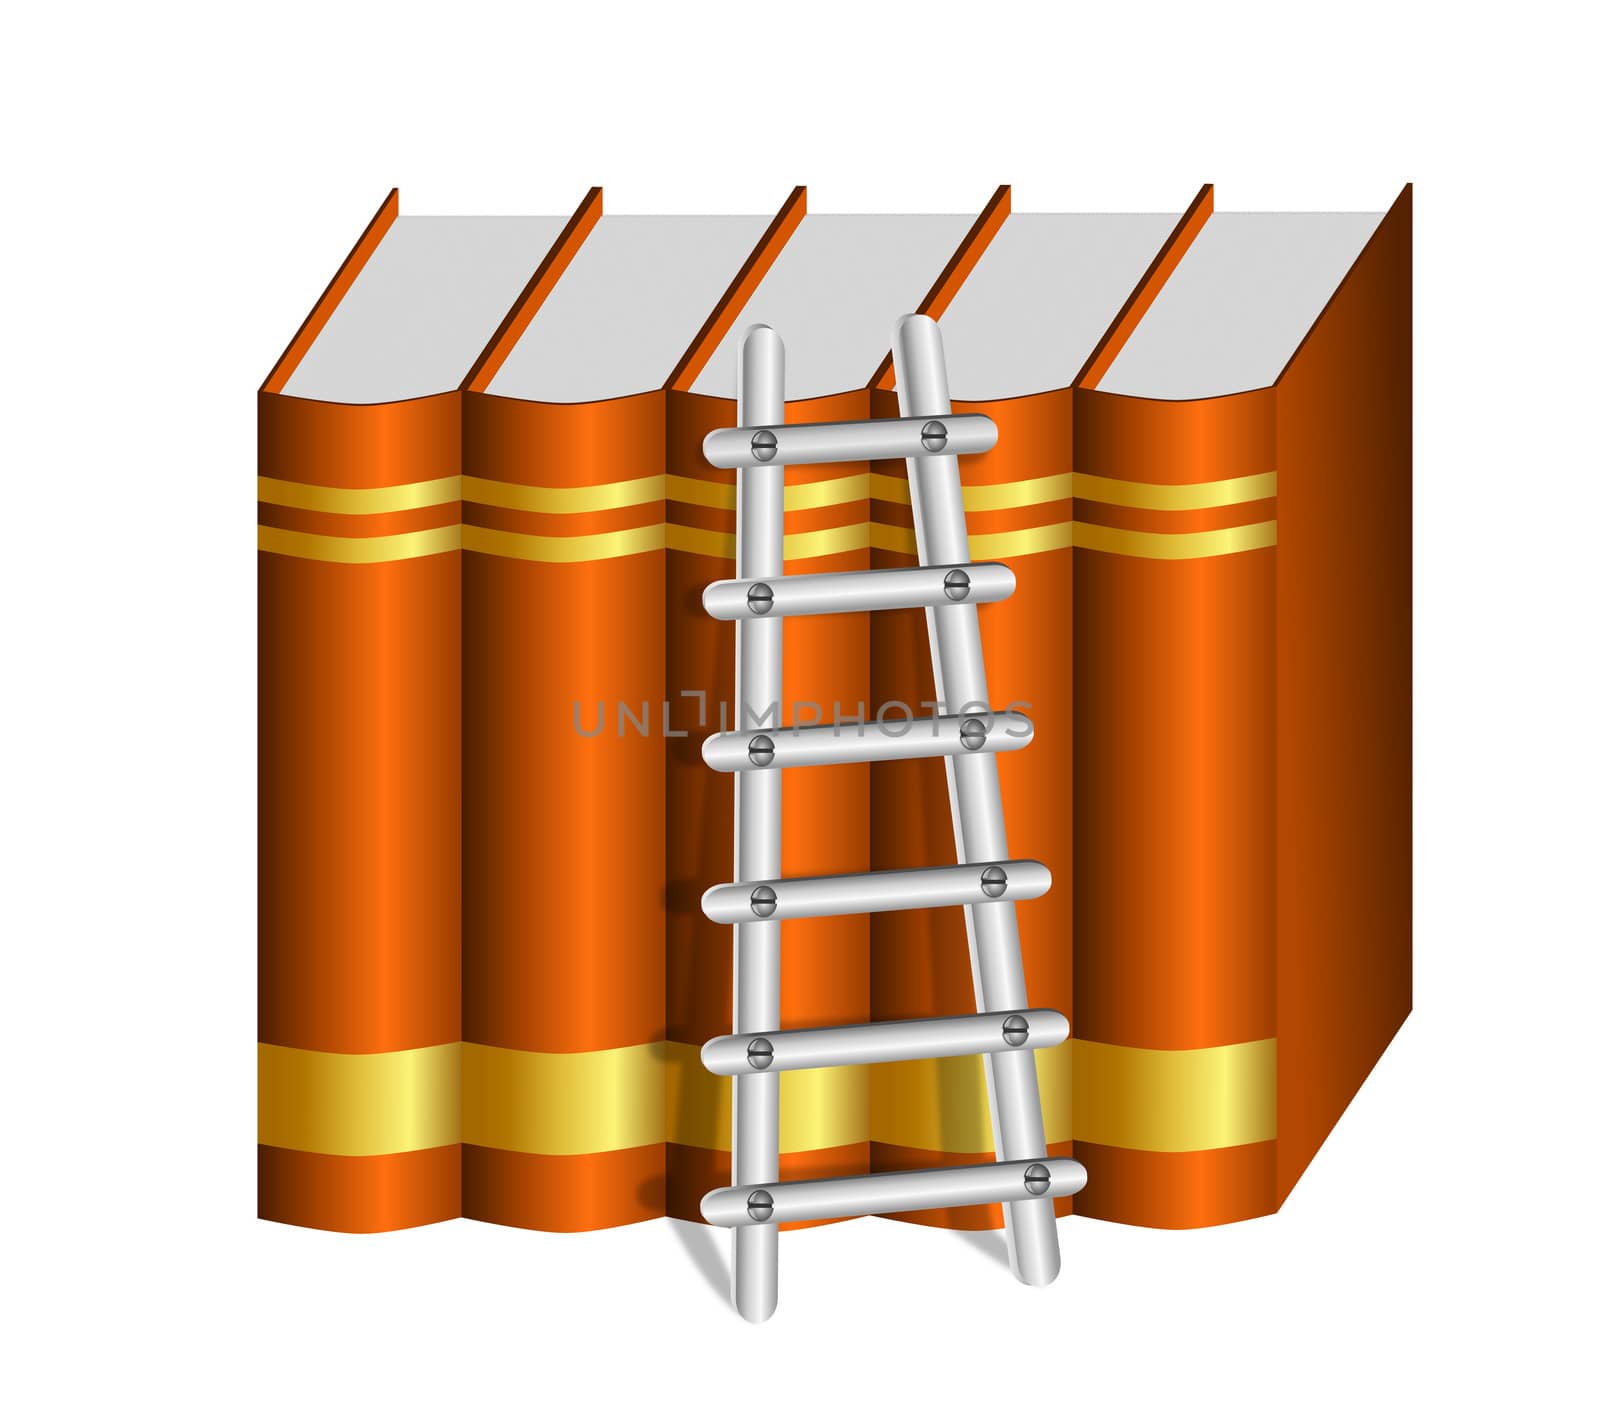 Ladder with a Row of Hard Bound Brown Books by RichieThakur